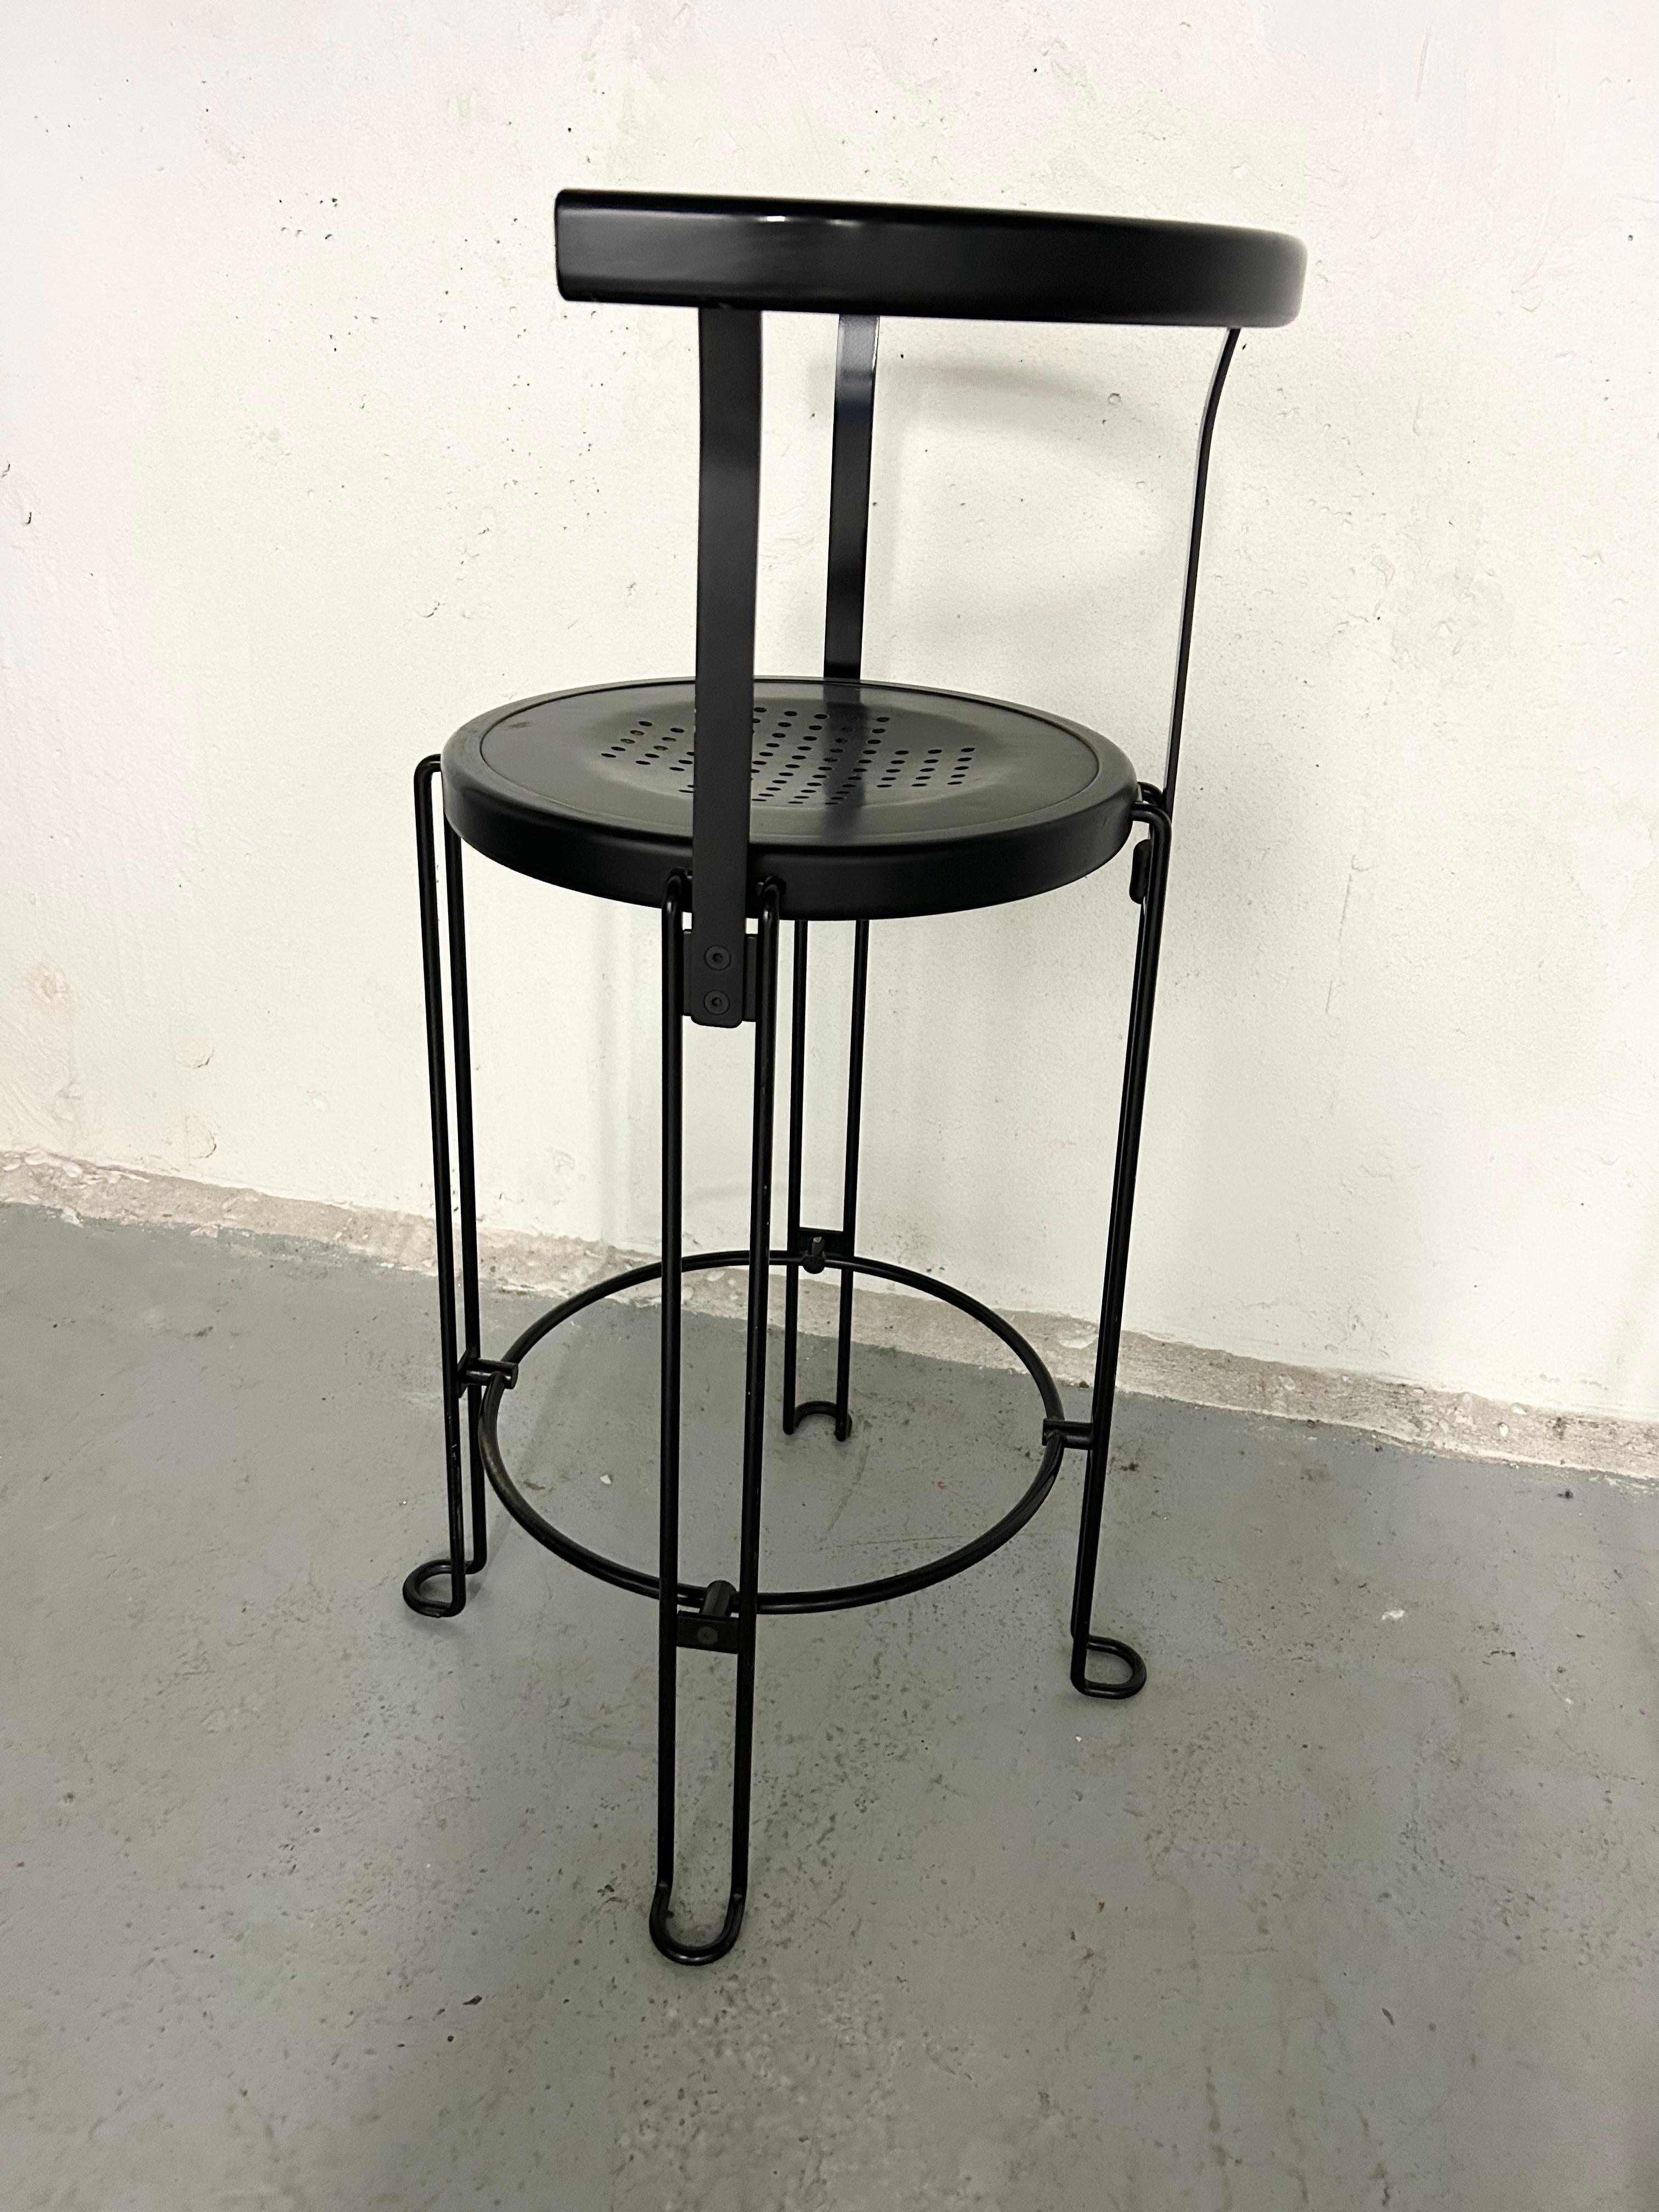 Borge Lindau for Bla Station Sweden, 1986 B4-65 Counter Height Stool 3